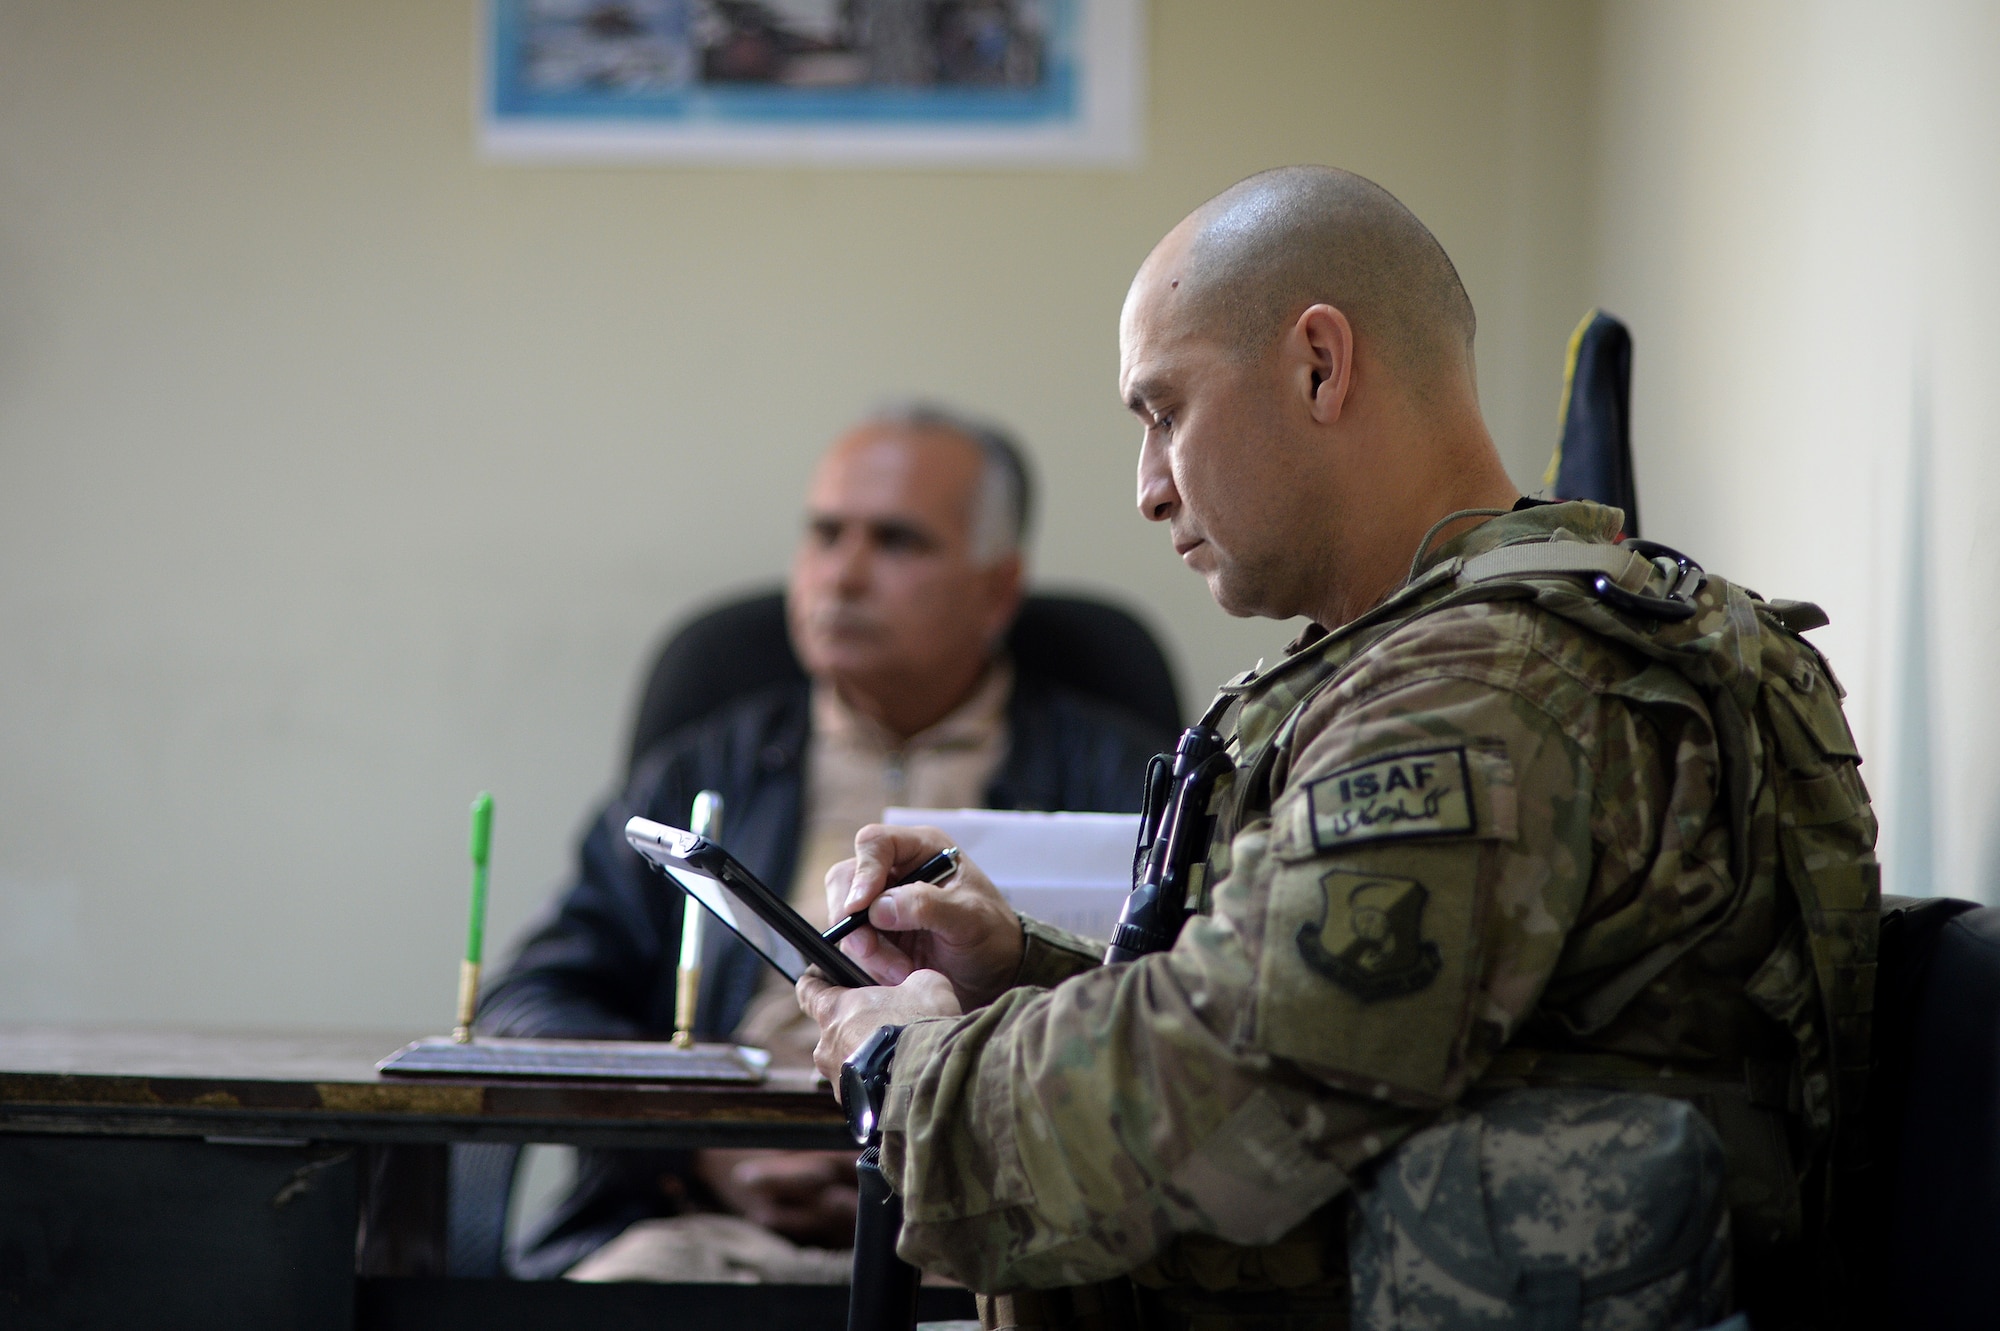 Senior Master Sgt. Carmelo Vega Martinez takes notes during a meeting with Afghan Air Force recruiters, Feb. 25, 2014, Kabul, Afghanistan. In support of Operation Enduring Freedom, Vega Martinez advises the Afghan Air Force on establishing and sustaining a recruiting service. Vega Martinez, a Ponce, Puerto Rico native, is deployed from the 368th Recruiting Squadron, Hill Air Force Base, Utah. Martinez is a 438th Air Expeditionary Wing/NATO Air Training Command-Afghanistan recruiting adviser. (U.S. Air Force photo/Tech. Sgt. Jason Robertson)
 